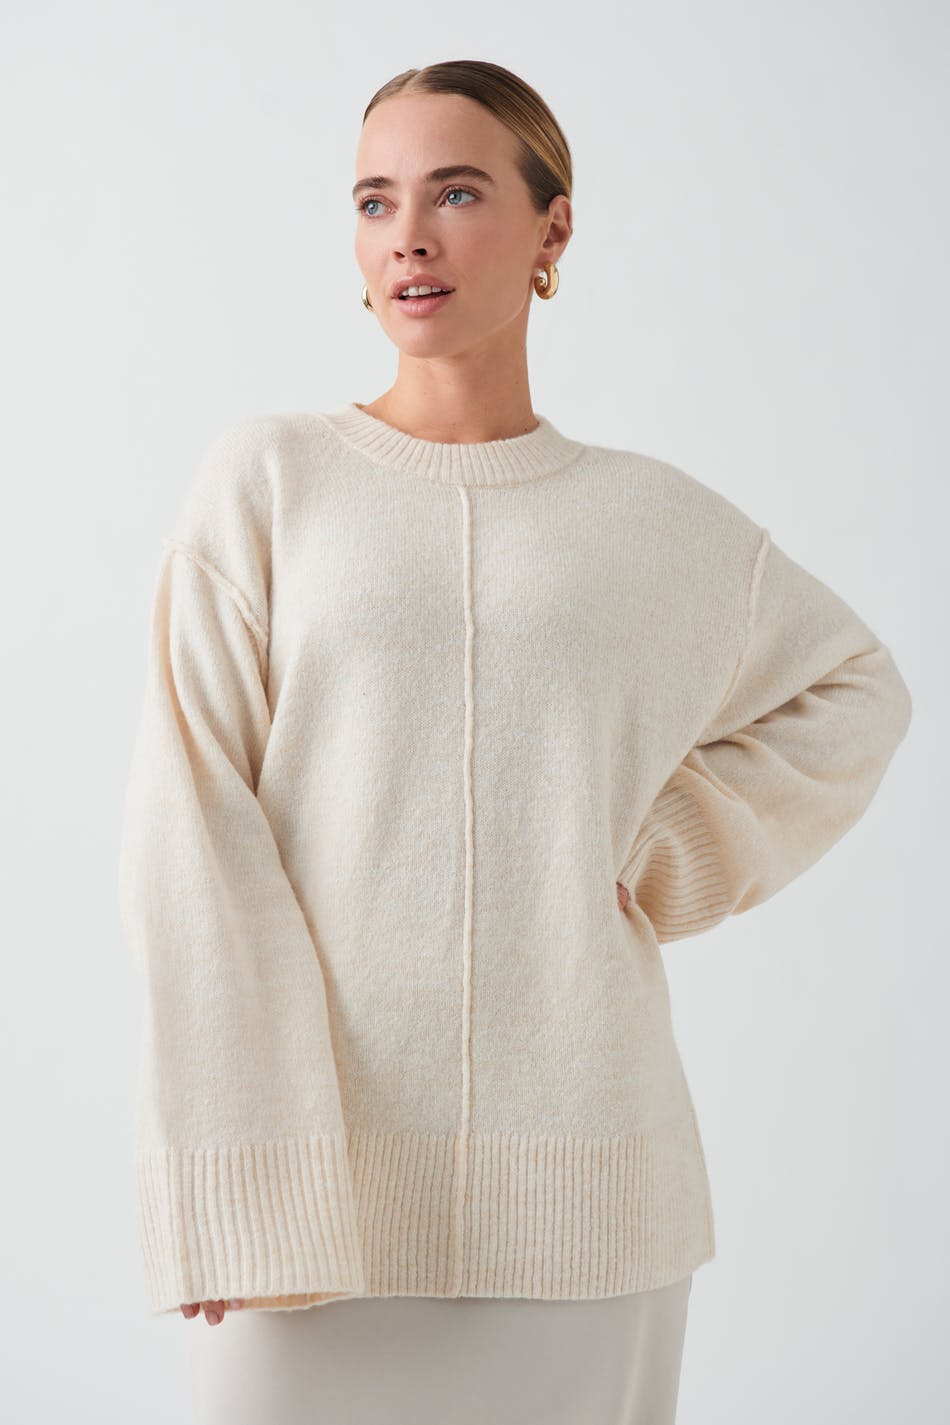 Gina Tricot - Knitted sweater - stickade tröjor - White - L - Female